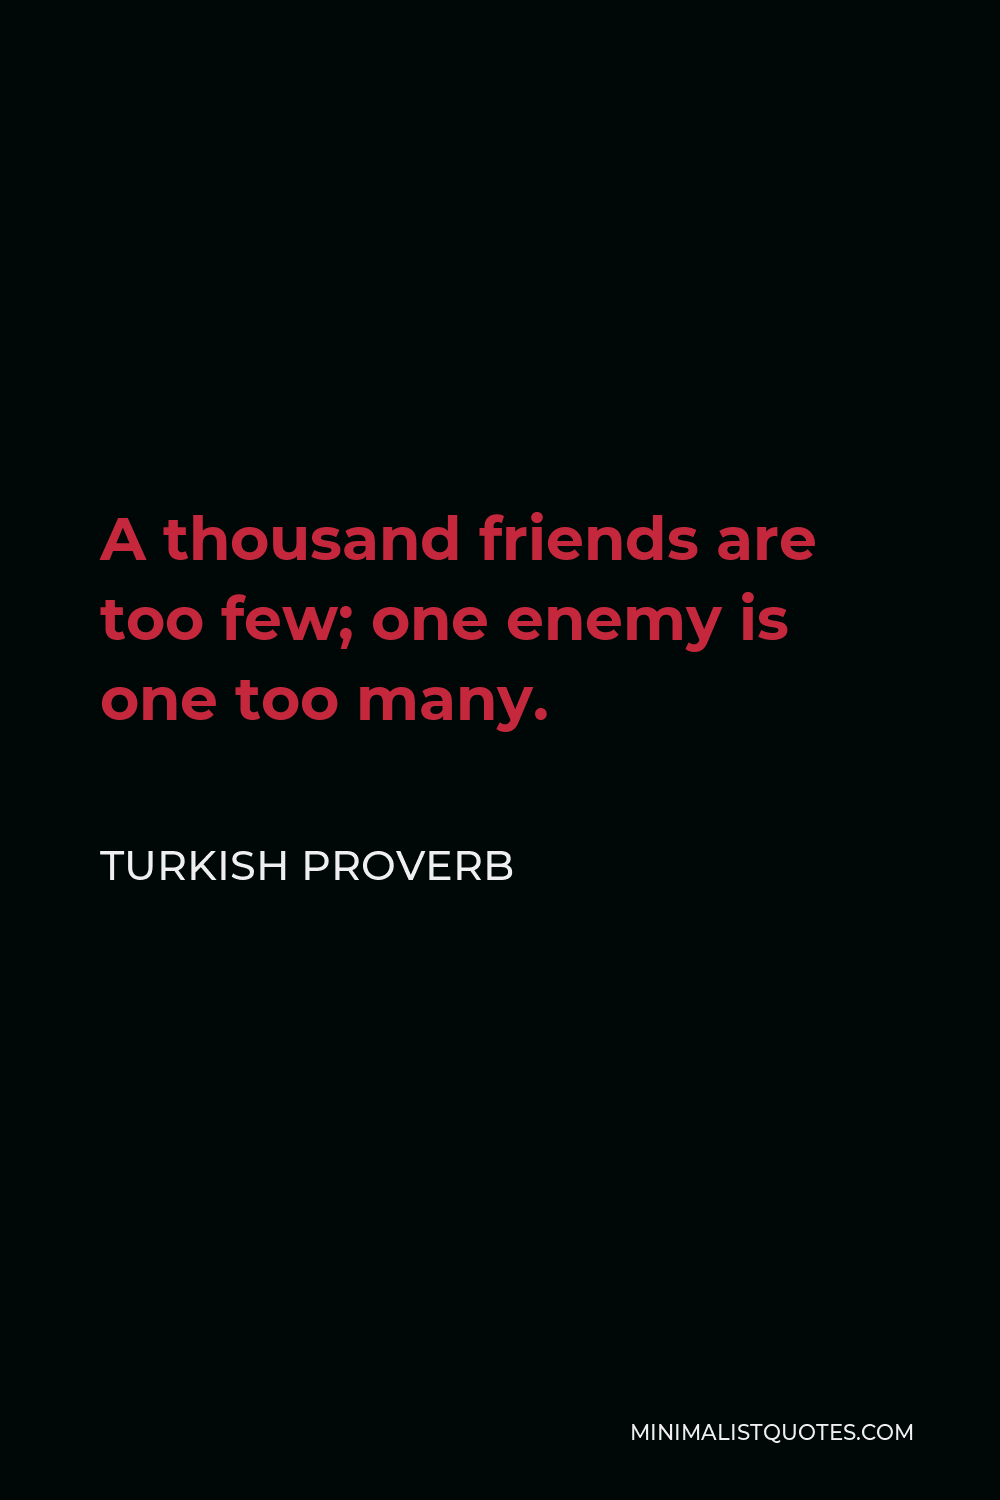 Turkish Proverb Quote - A thousand friends are too few; one enemy is one too many.